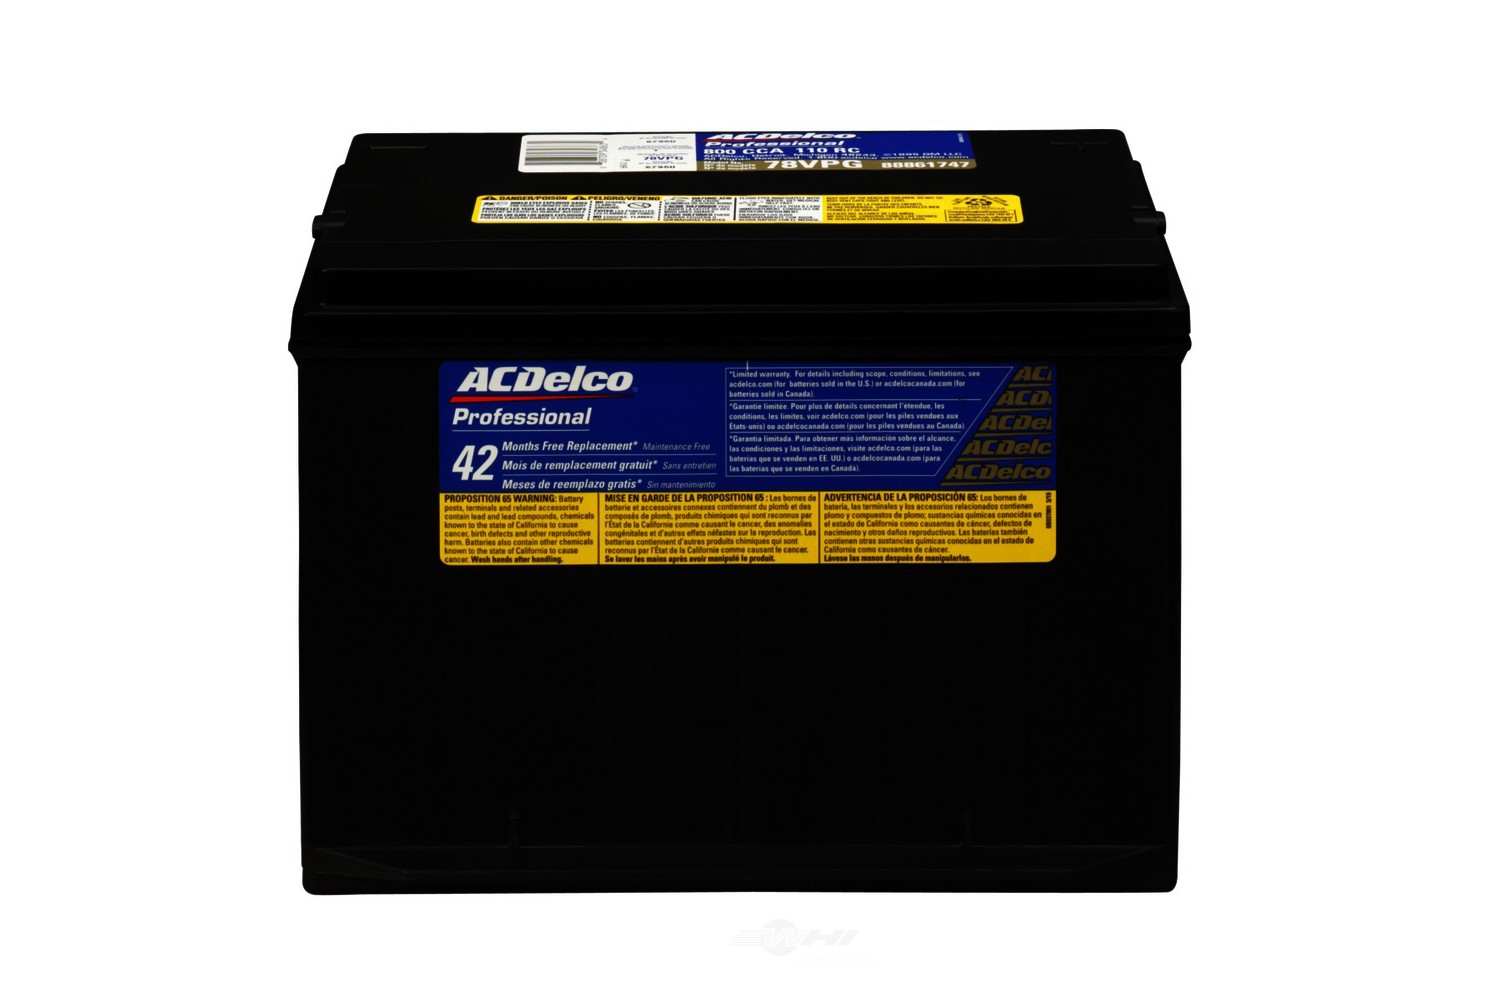 battery-gold-acdelco-pro-78vpg-110-74-picclick